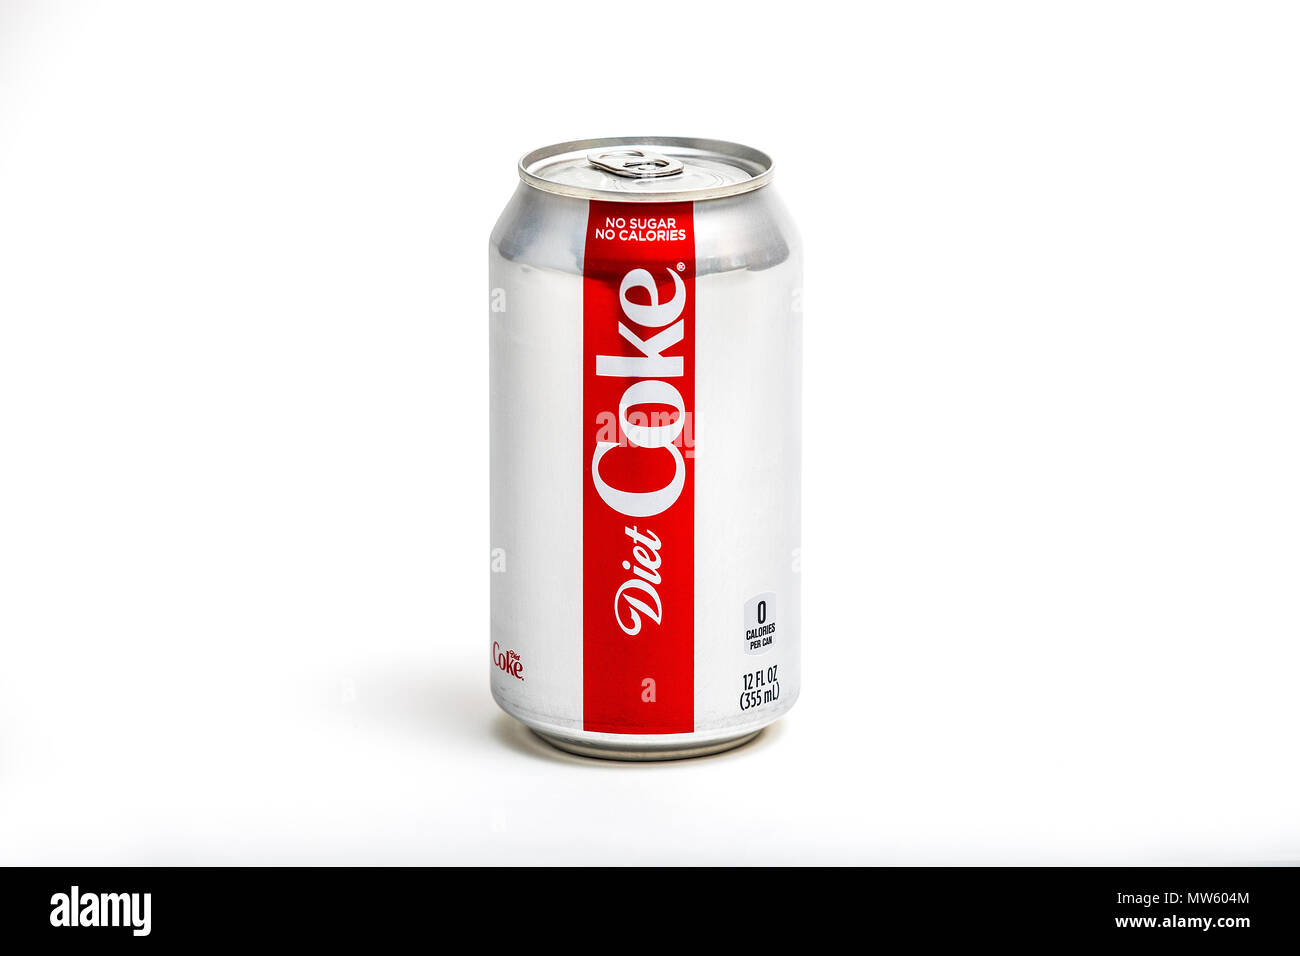 A can of Diet coke Stock Photo